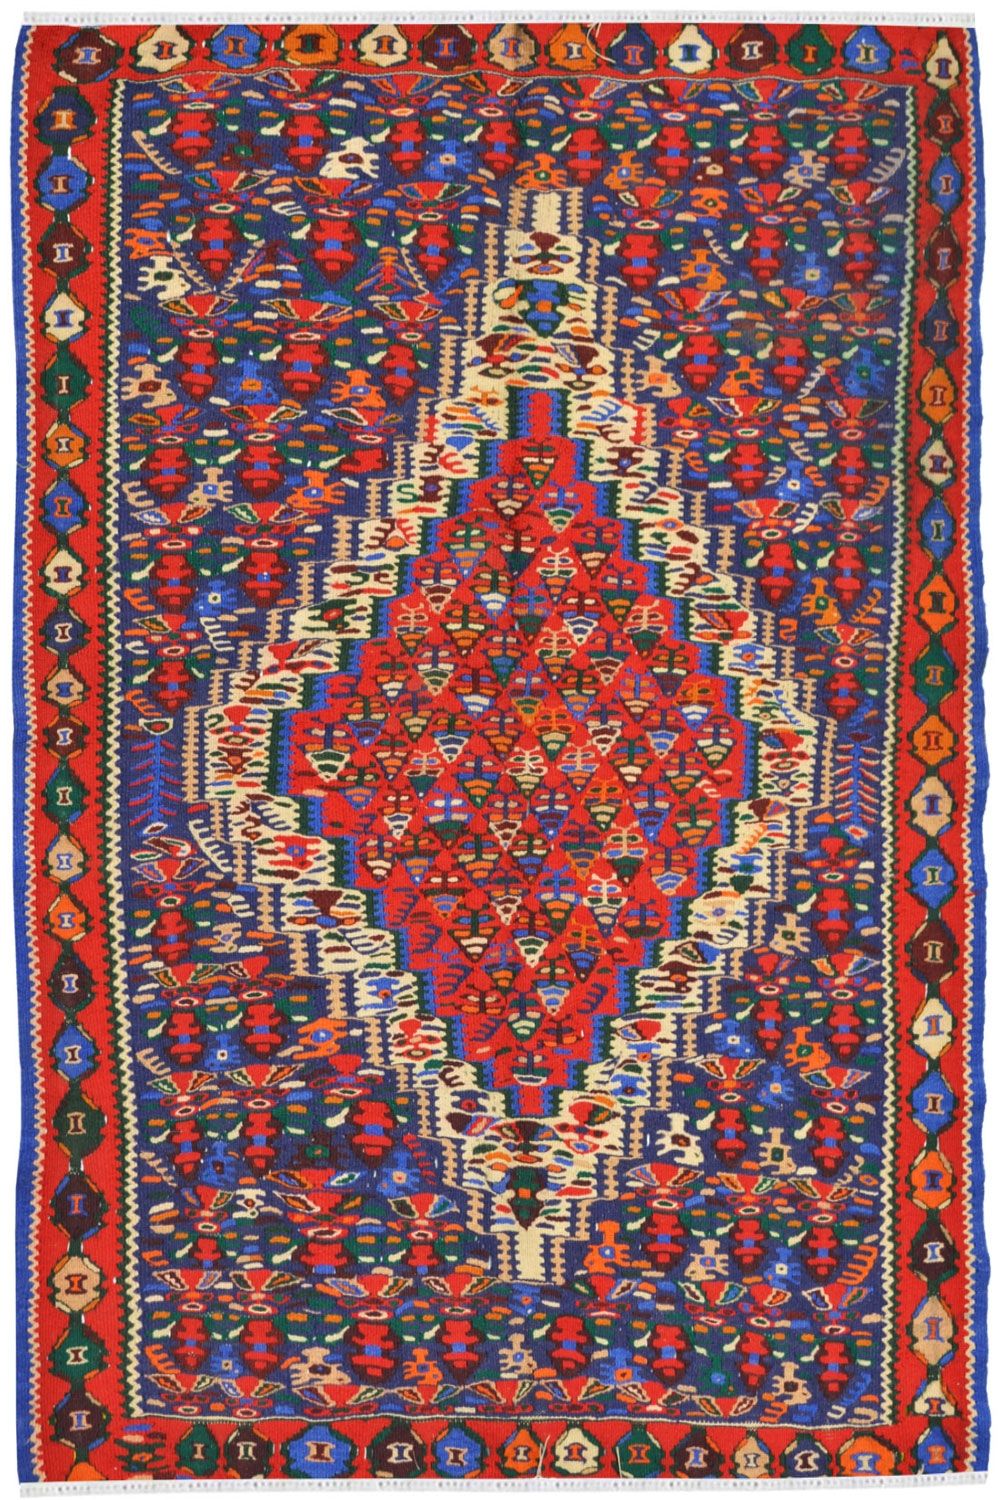 Jewel Moroccan Rug, Kilim Rugs and Carpets online